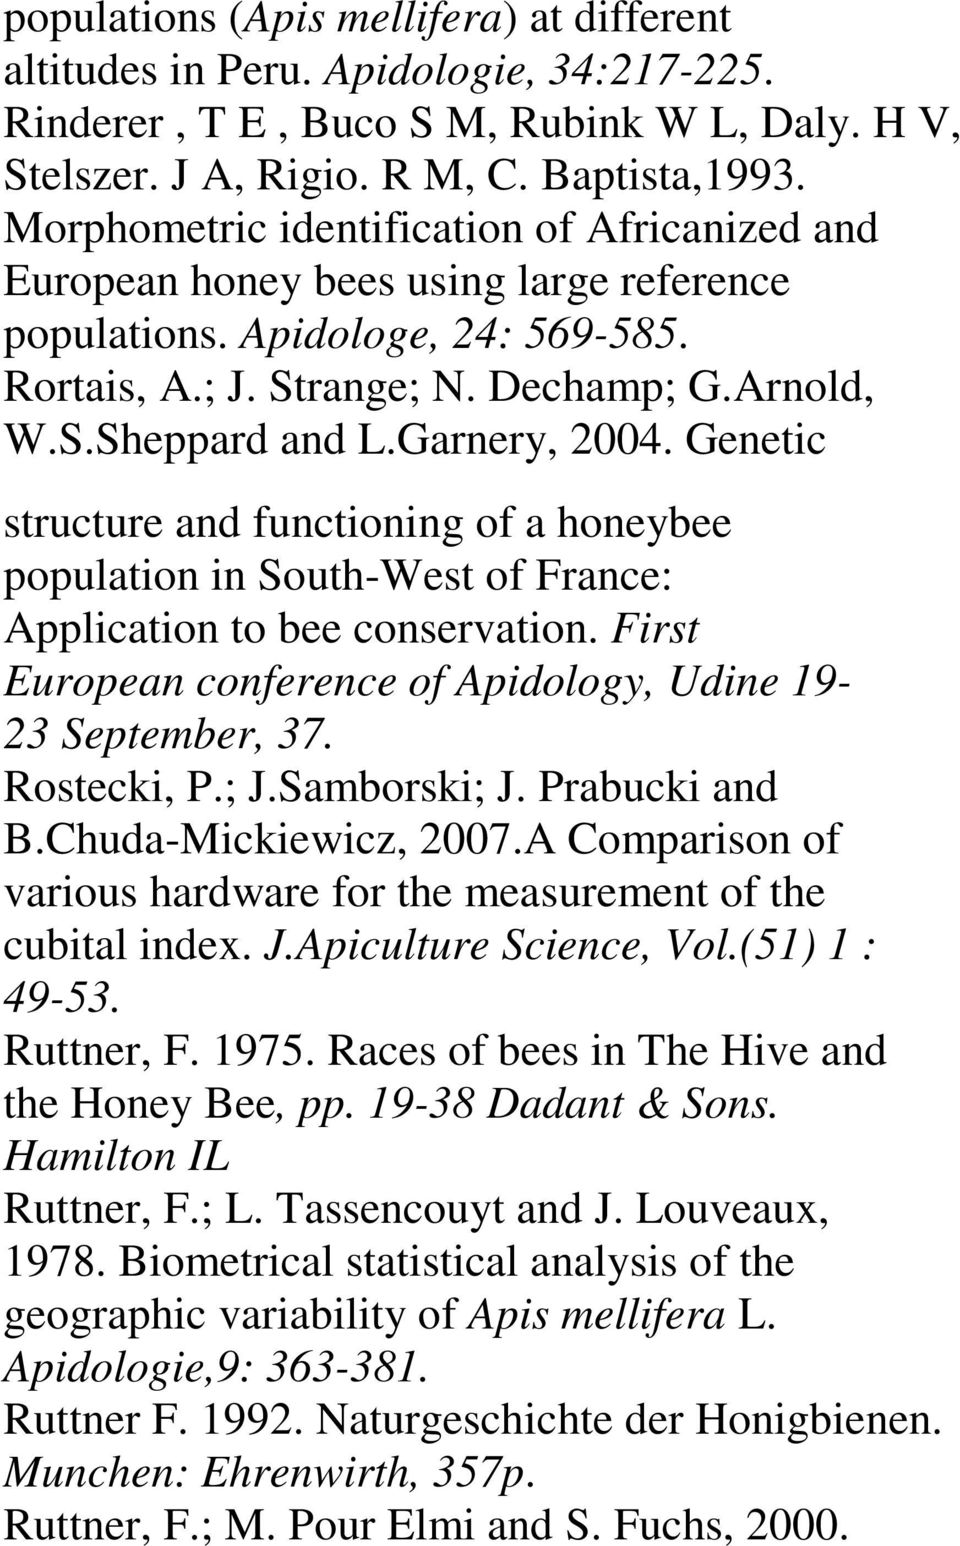 Garnery, 2004. Genetic structure and functioning of a honeybee population in South-West of France: Application to bee conservation. First European conference of Apidology, Udine 19-23 September, 37.